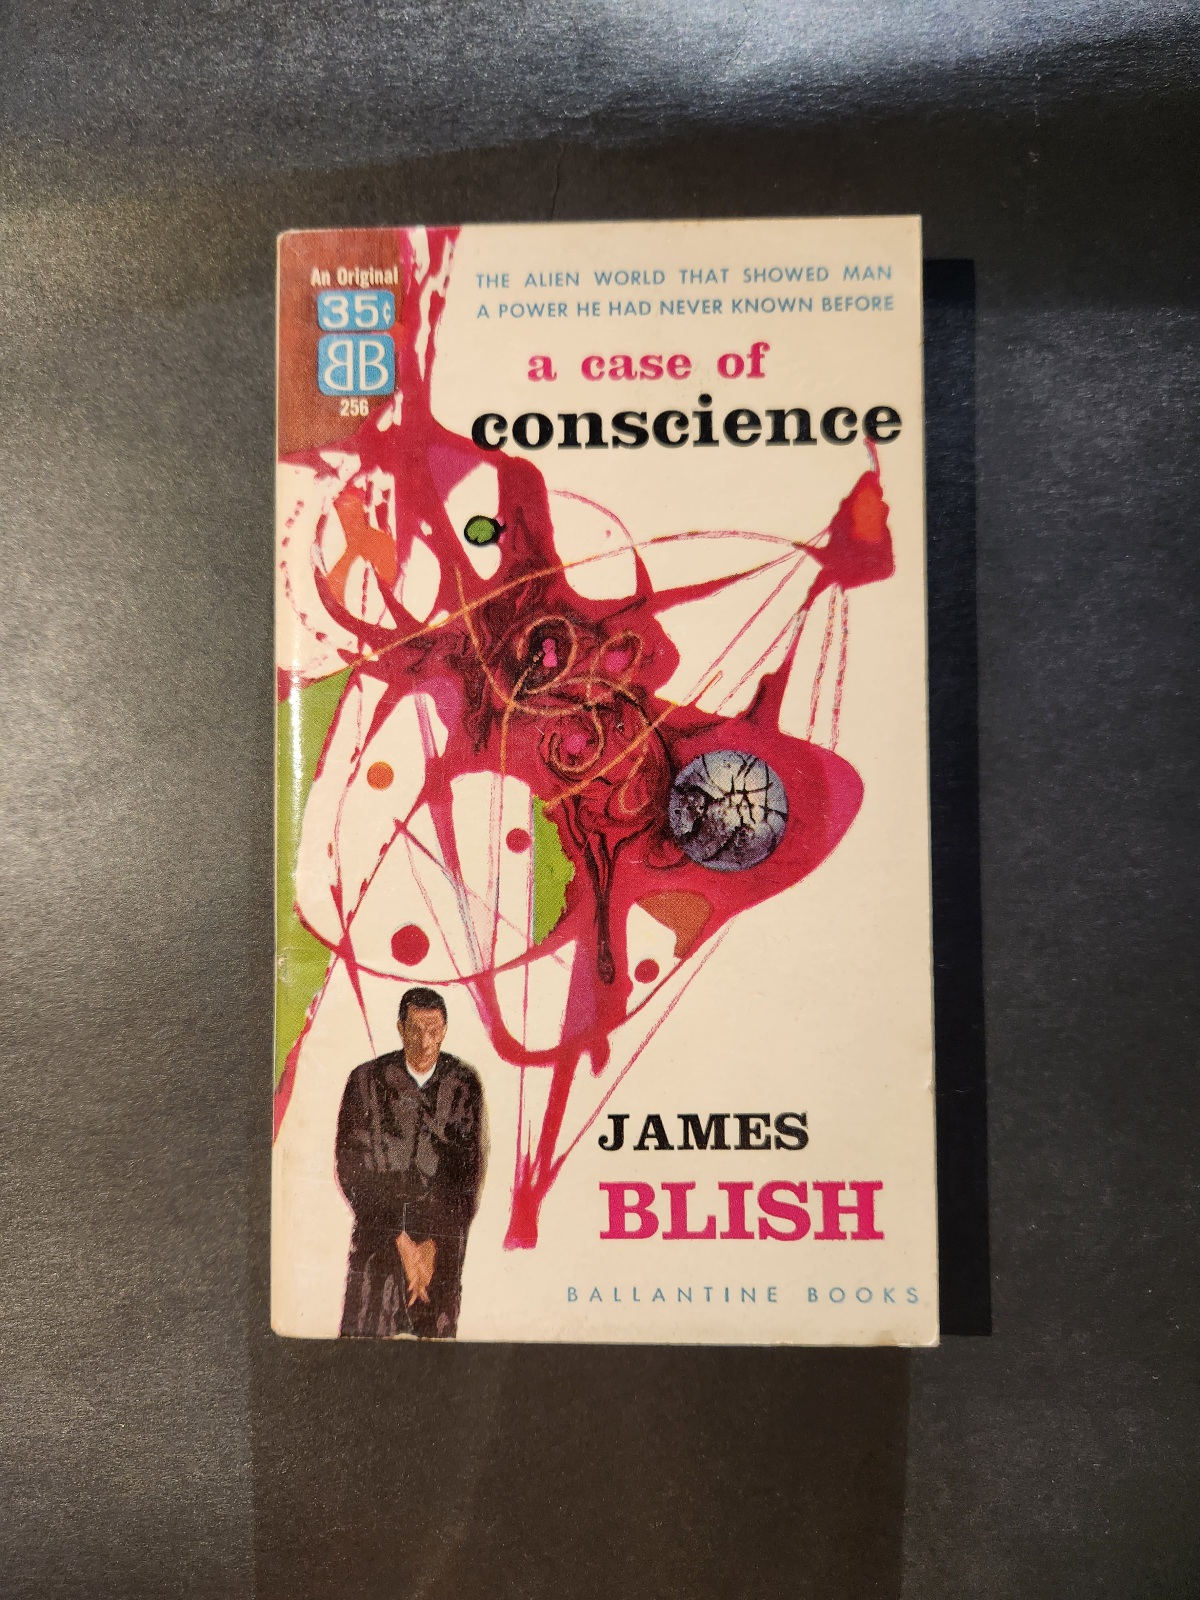 A Case of Conscience by James Blish Paperback 1958 Ballantine Books